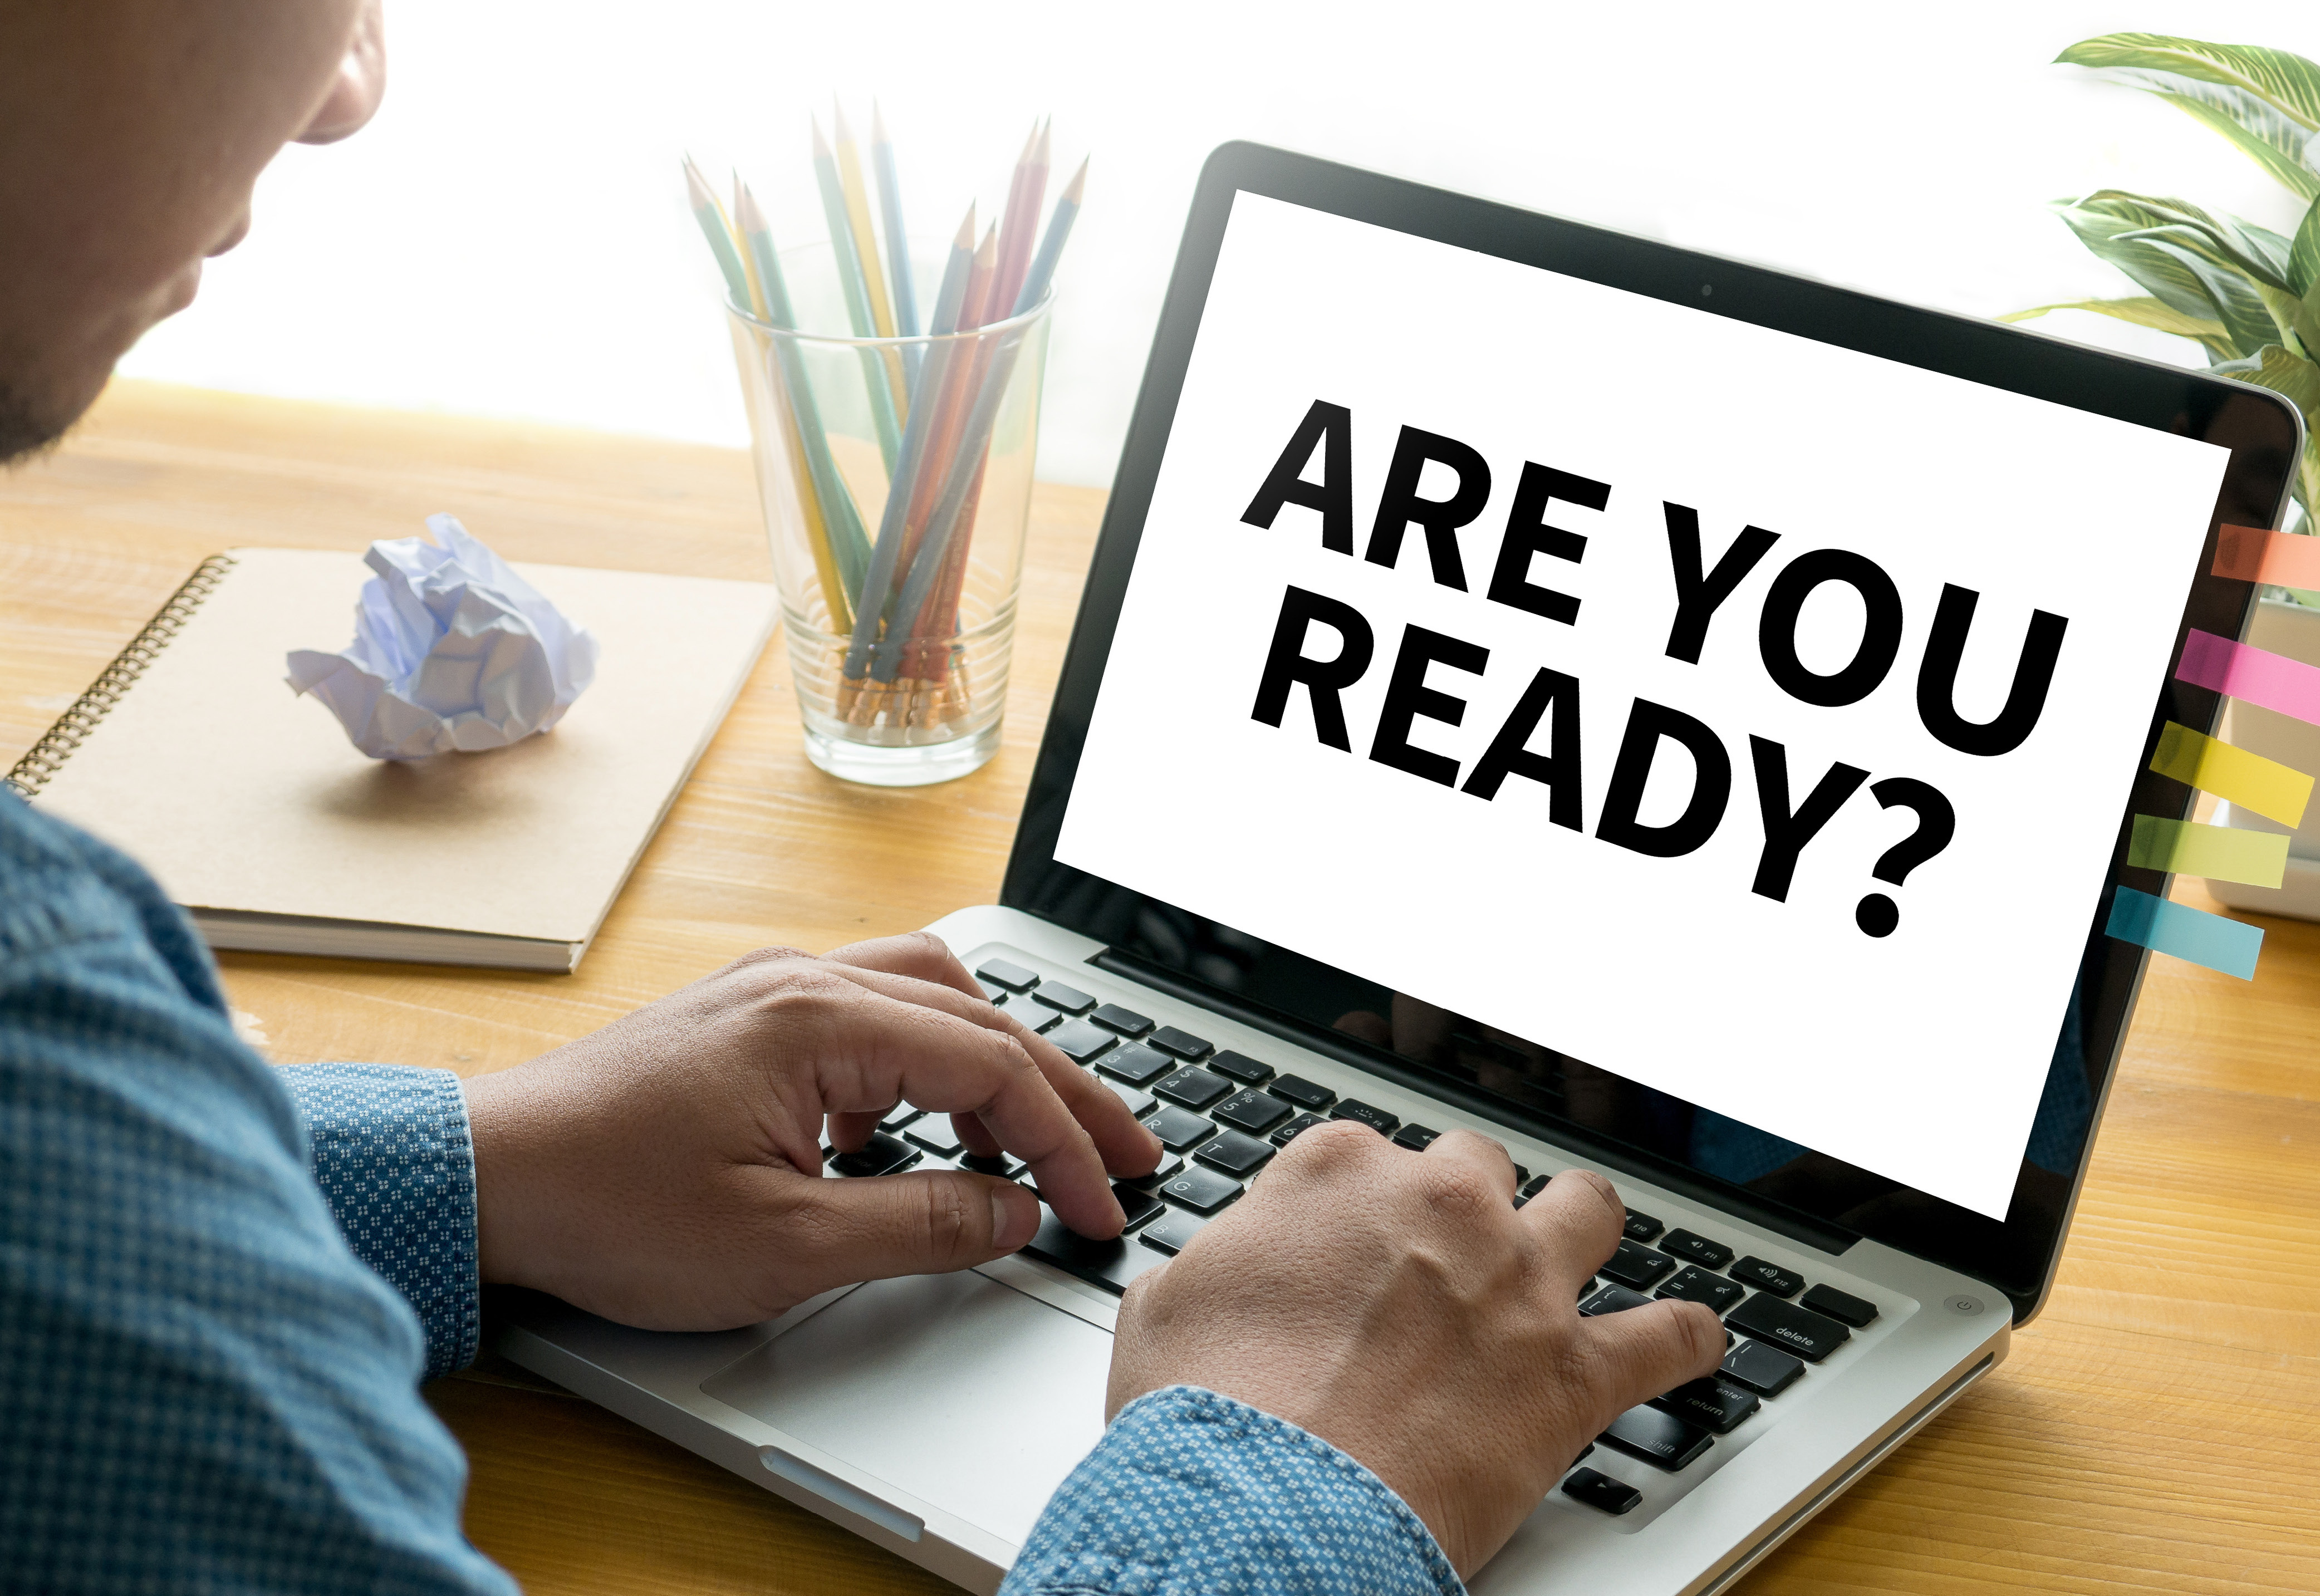 A person sitting in front of a laptop that says, "Are You Ready?" on the screen